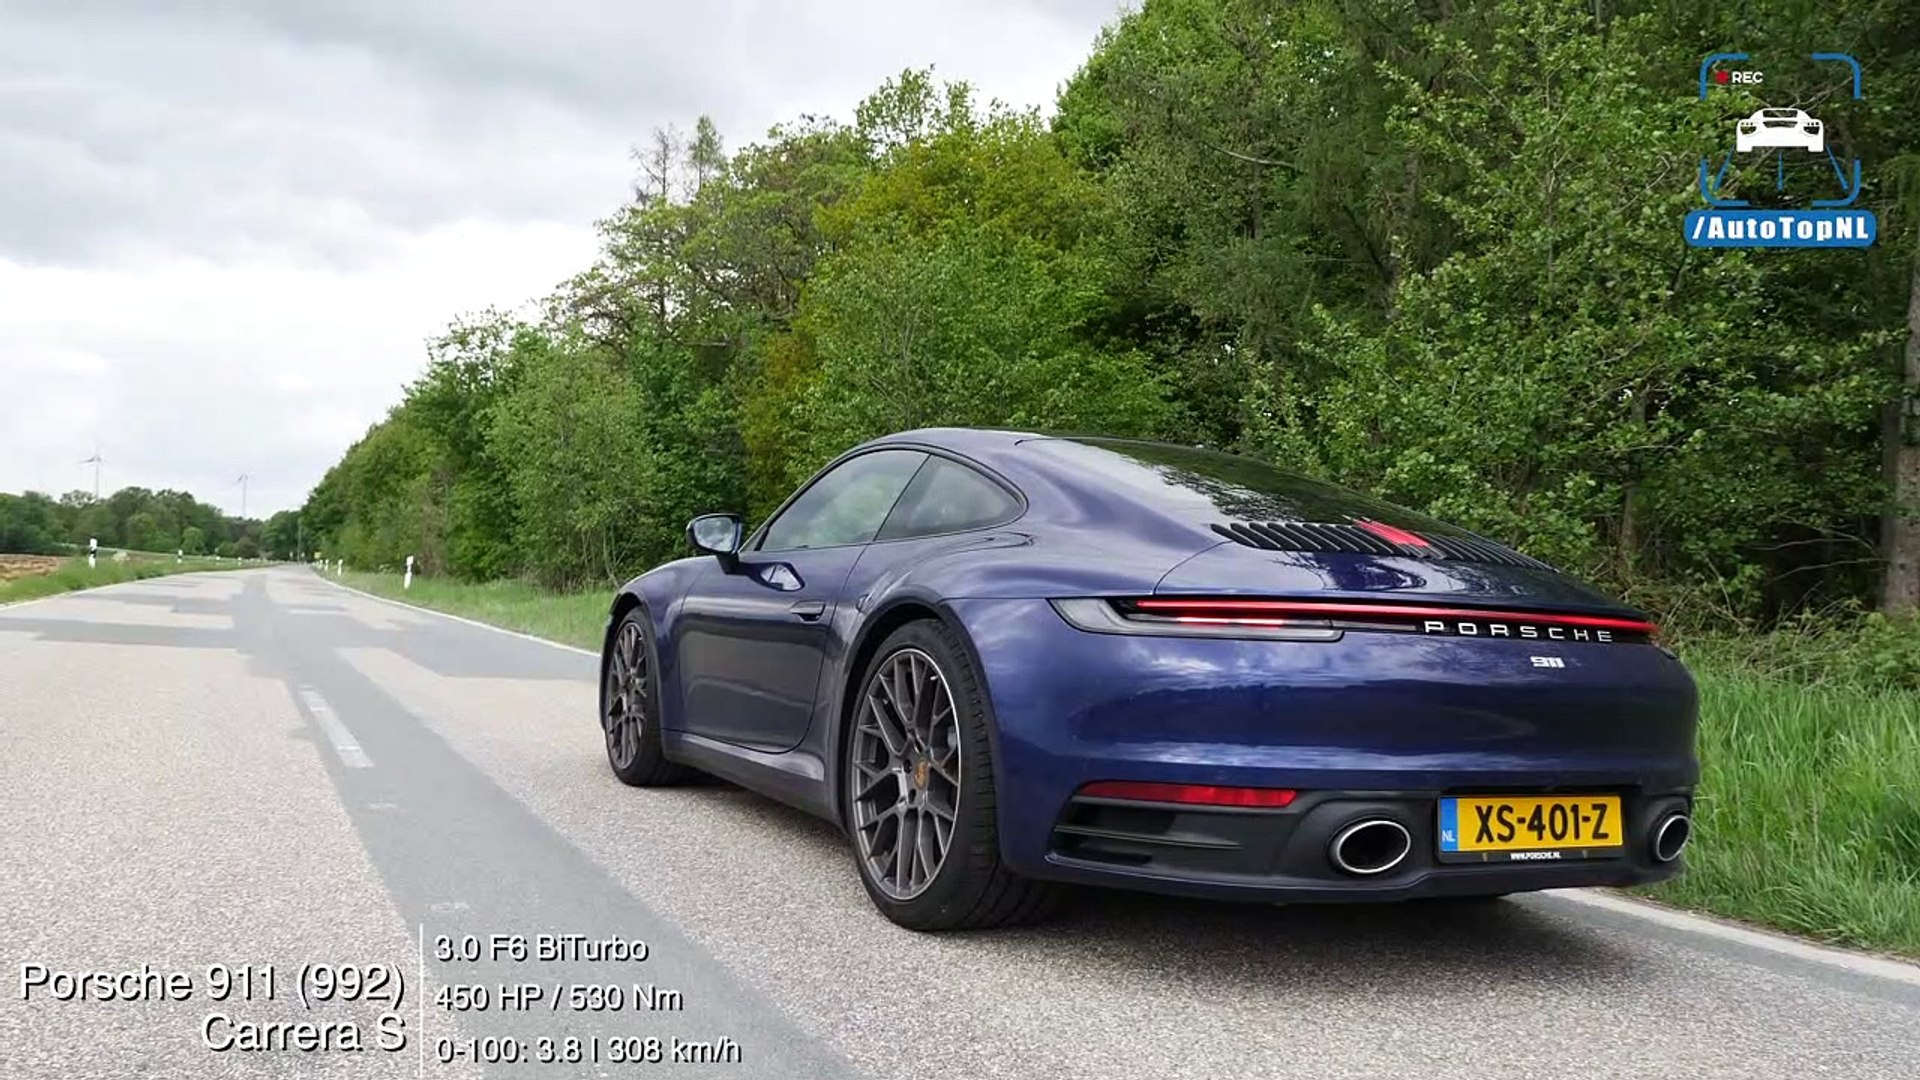 NEW! Porsche 911 992 Carrera S 0-323km/h ACCELERATION & TOP SPEED by  AutoTopNL - Dailymotion Video